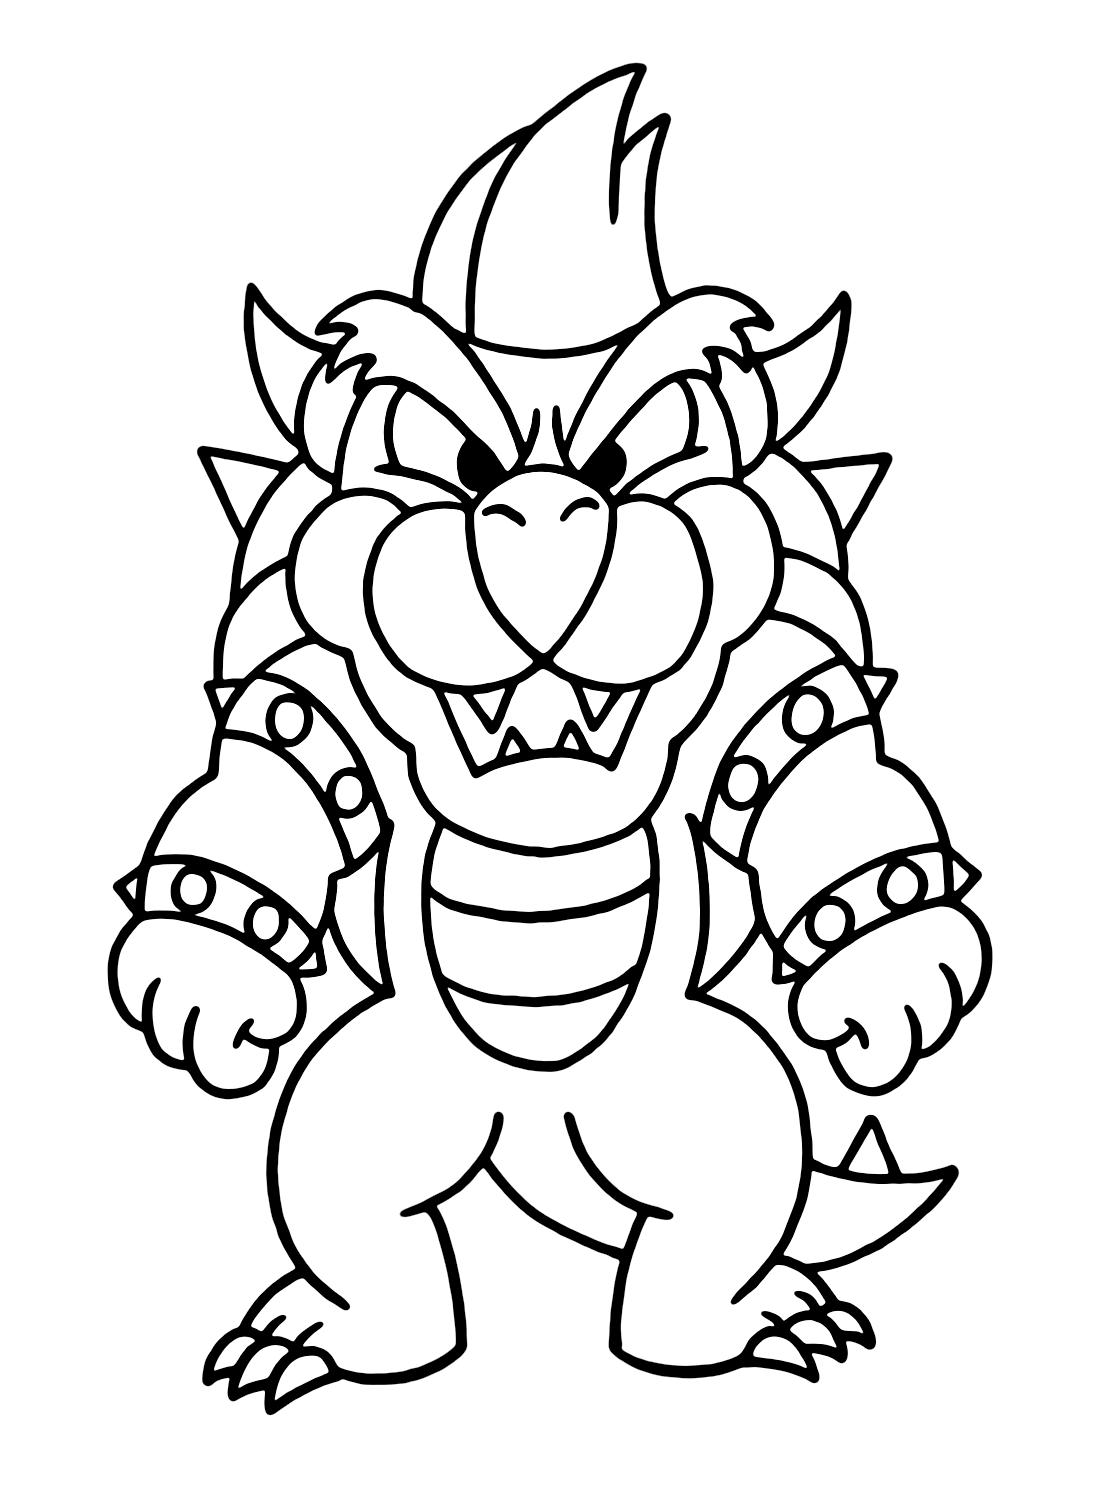 Draw Bowser from Super Mario Coloring Pages